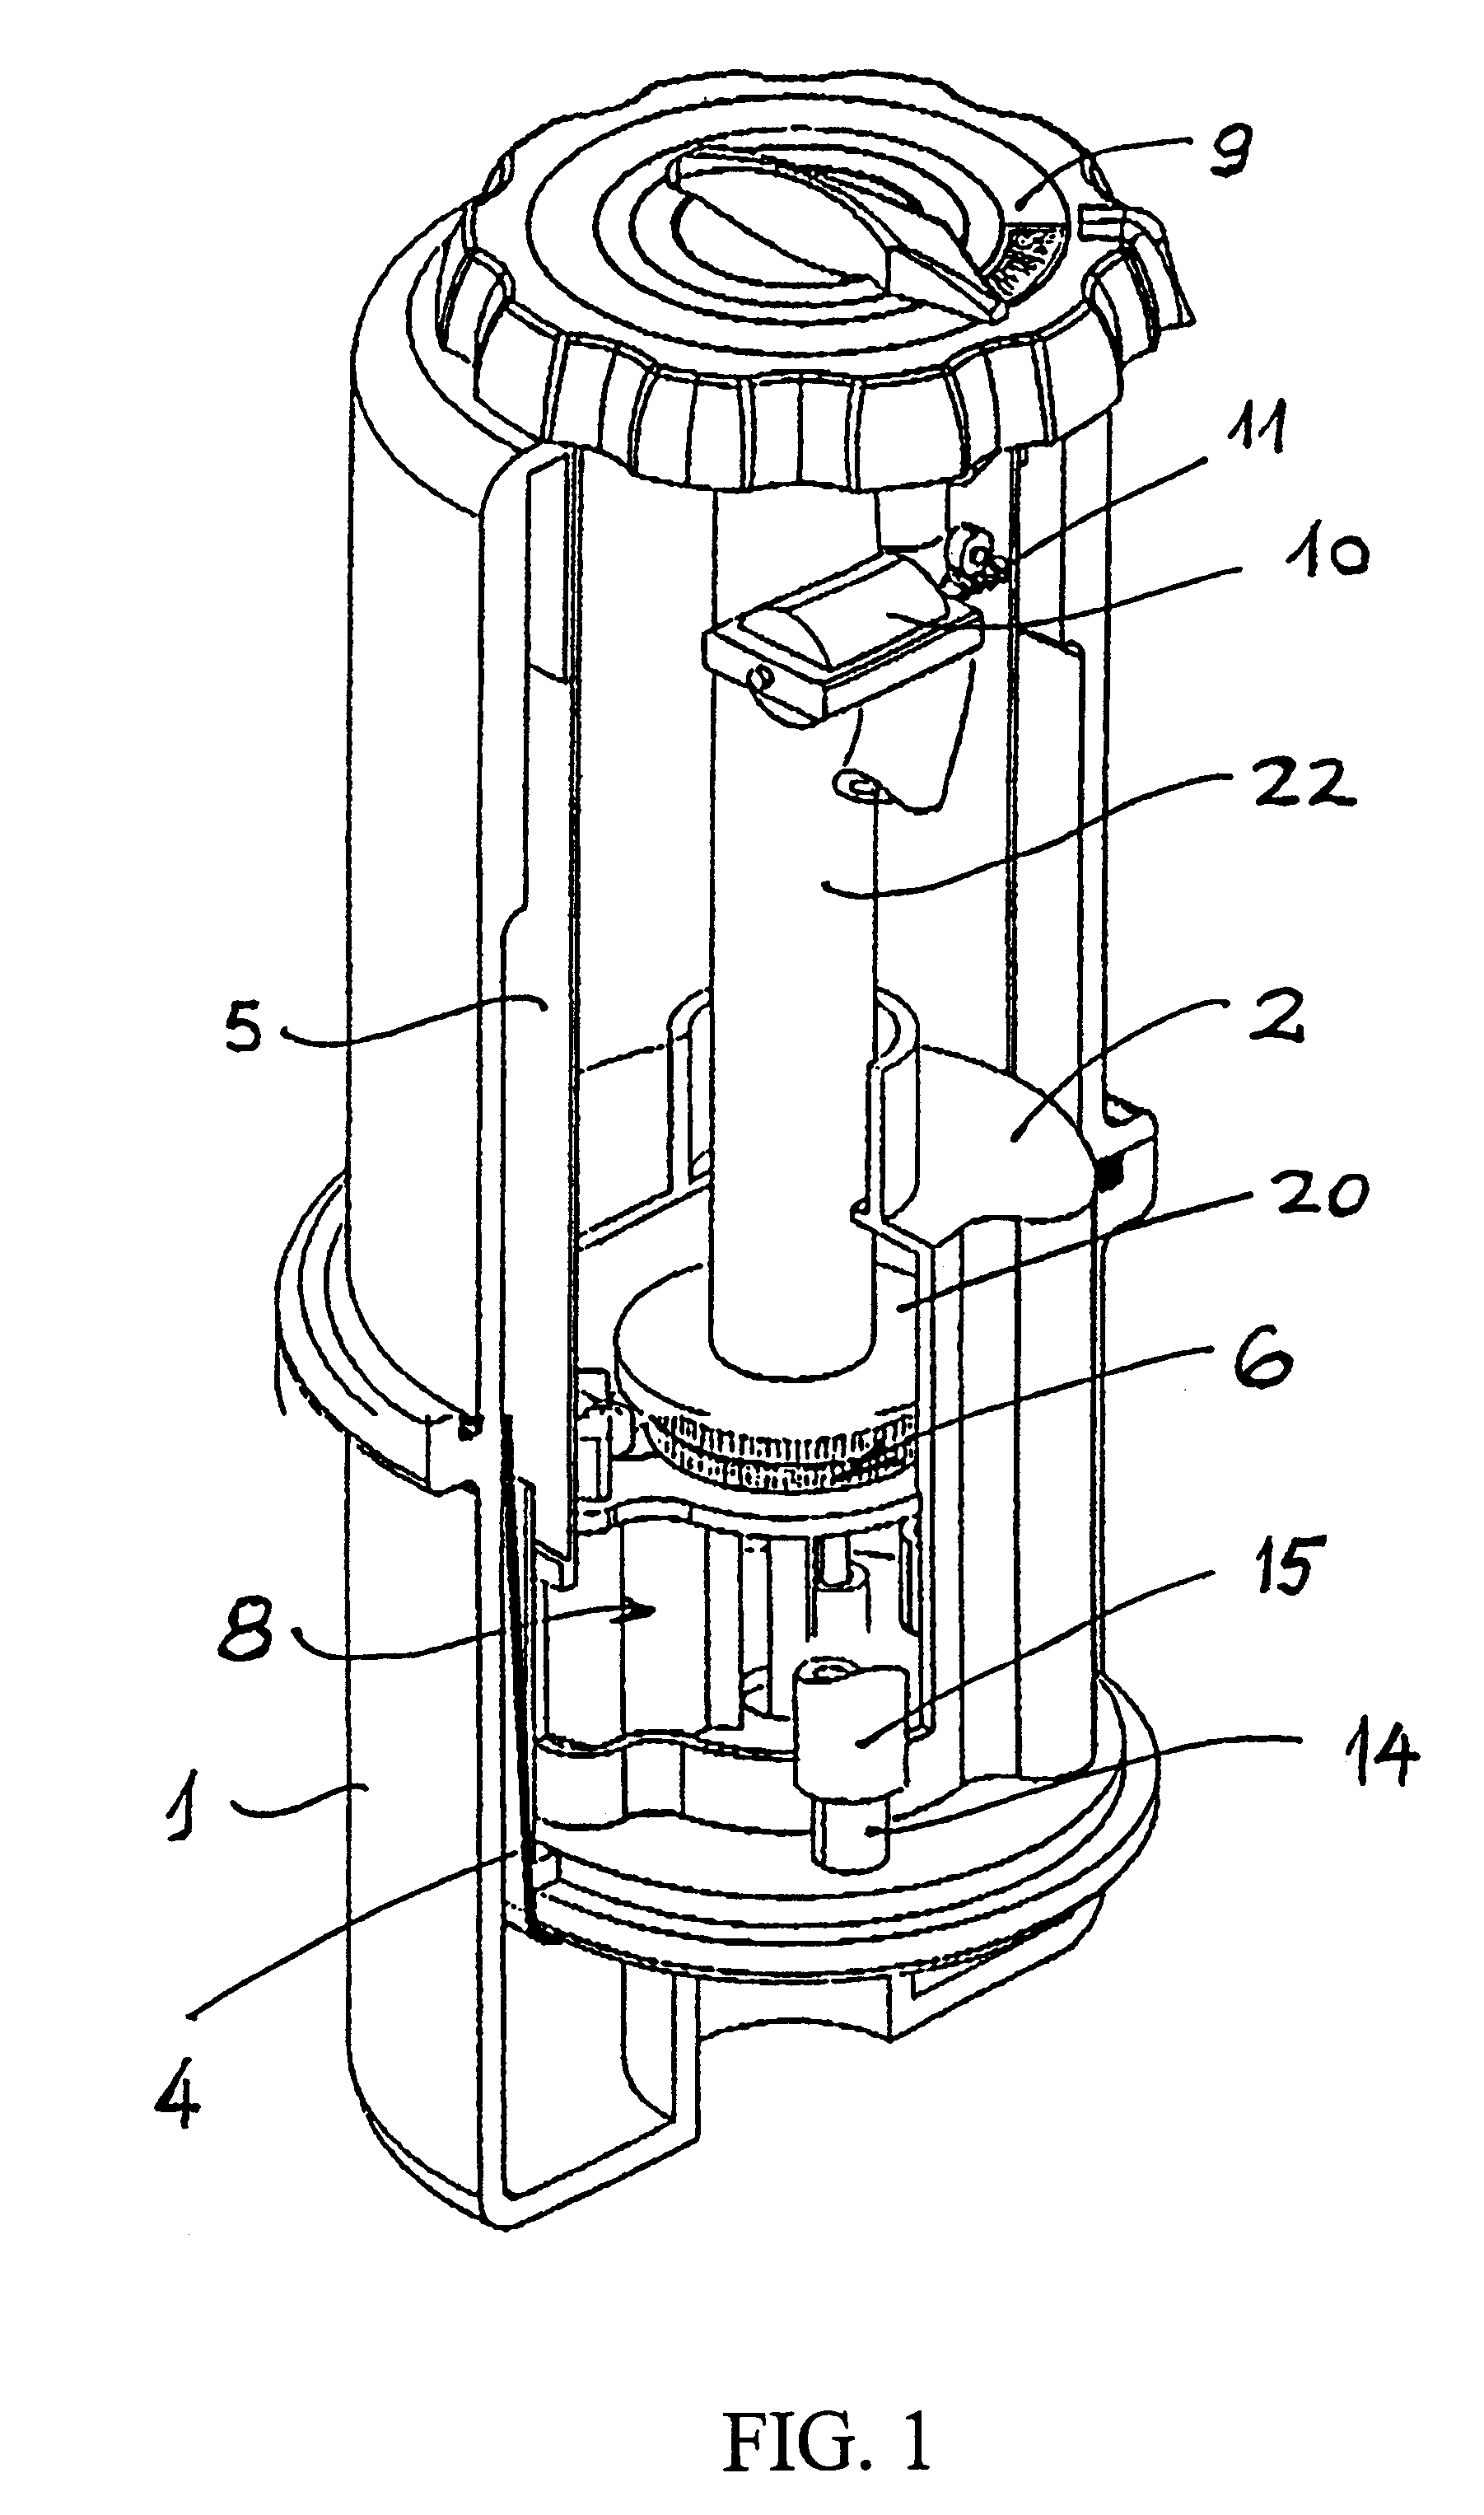 Electrically operated sprinkler